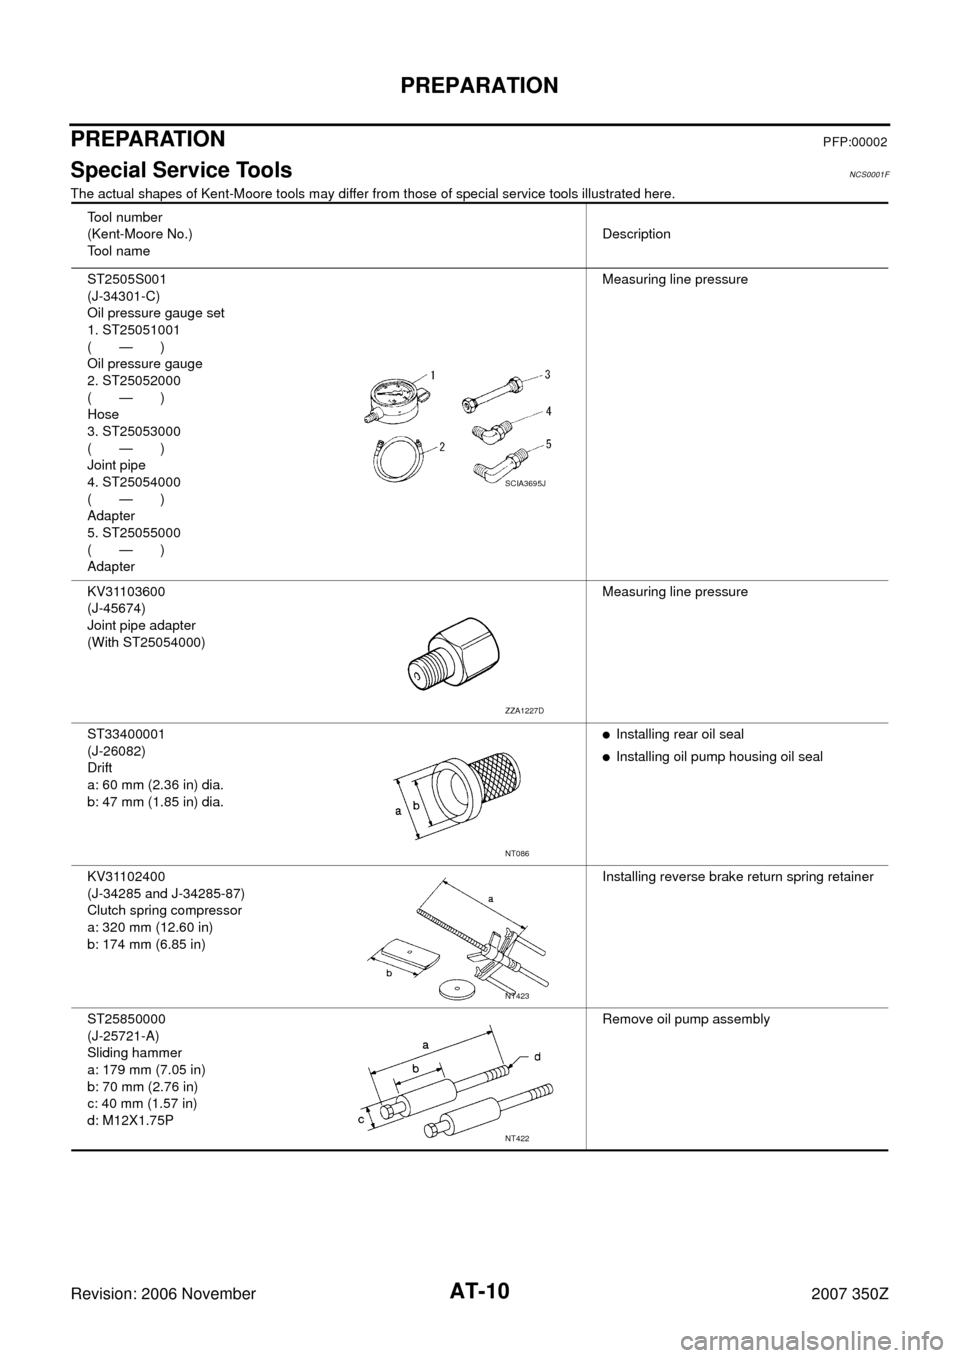 NISSAN 350Z 2007 Z33 Automatic Transmission Workshop Manual AT-10
PREPARATION
Revision: 2006 November2007 350Z
PREPARATIONPFP:00002
Special Service ToolsNCS0001F
The actual shapes of Kent-Moore tools may differ from those of special service tools illustrated h